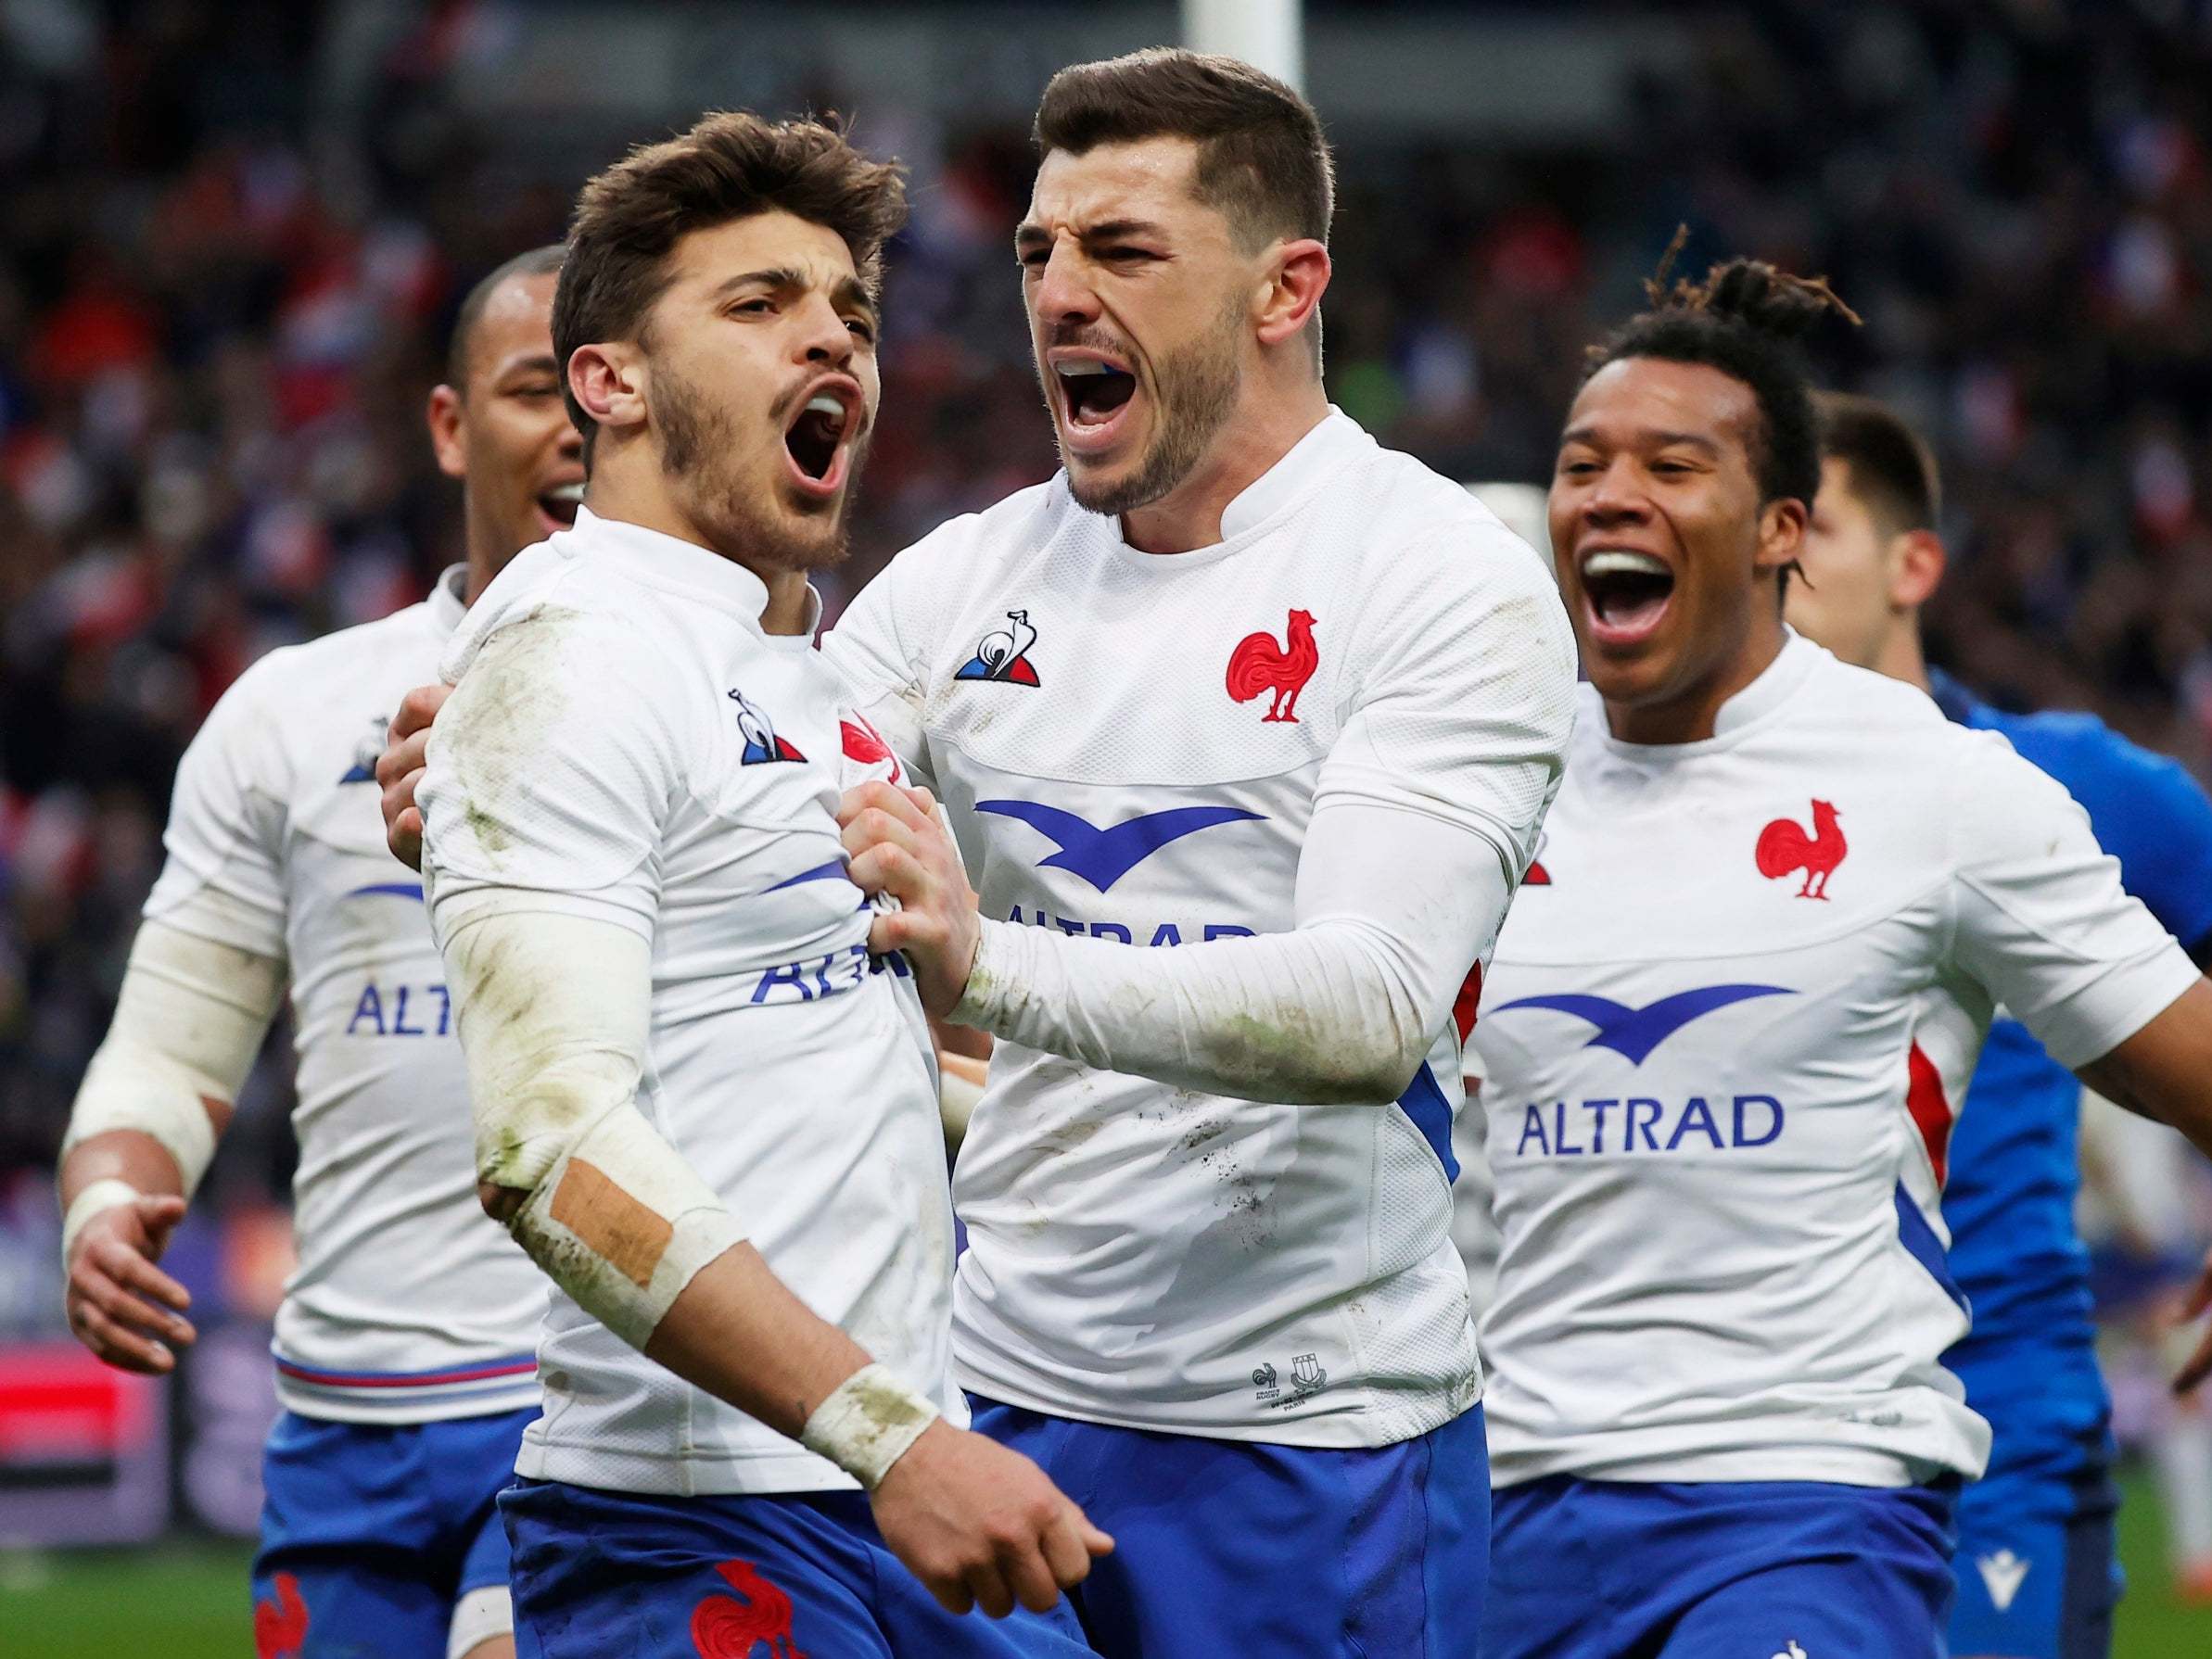 France go top of the Six Nations standings with two wins from two